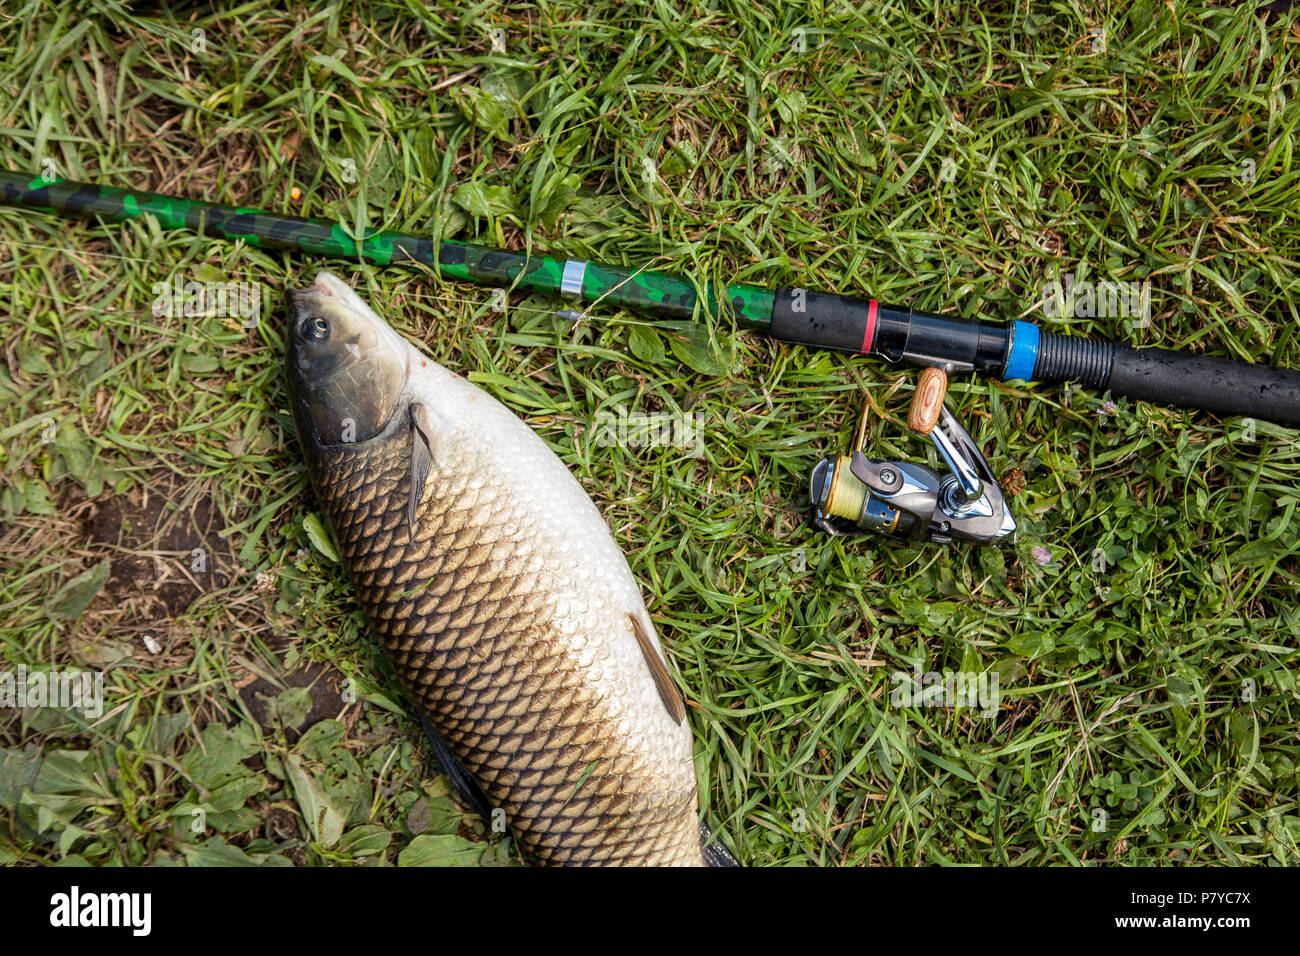 https://c8.alamy.com/comp/P7YC7X/catching-freshwater-fish-and-fishing-rods-with-fishing-reels-on-green-grass-white-amour-and-fishing-rod-with-reel-lying-on-green-grassfishing-concep-P7YC7X.jpg